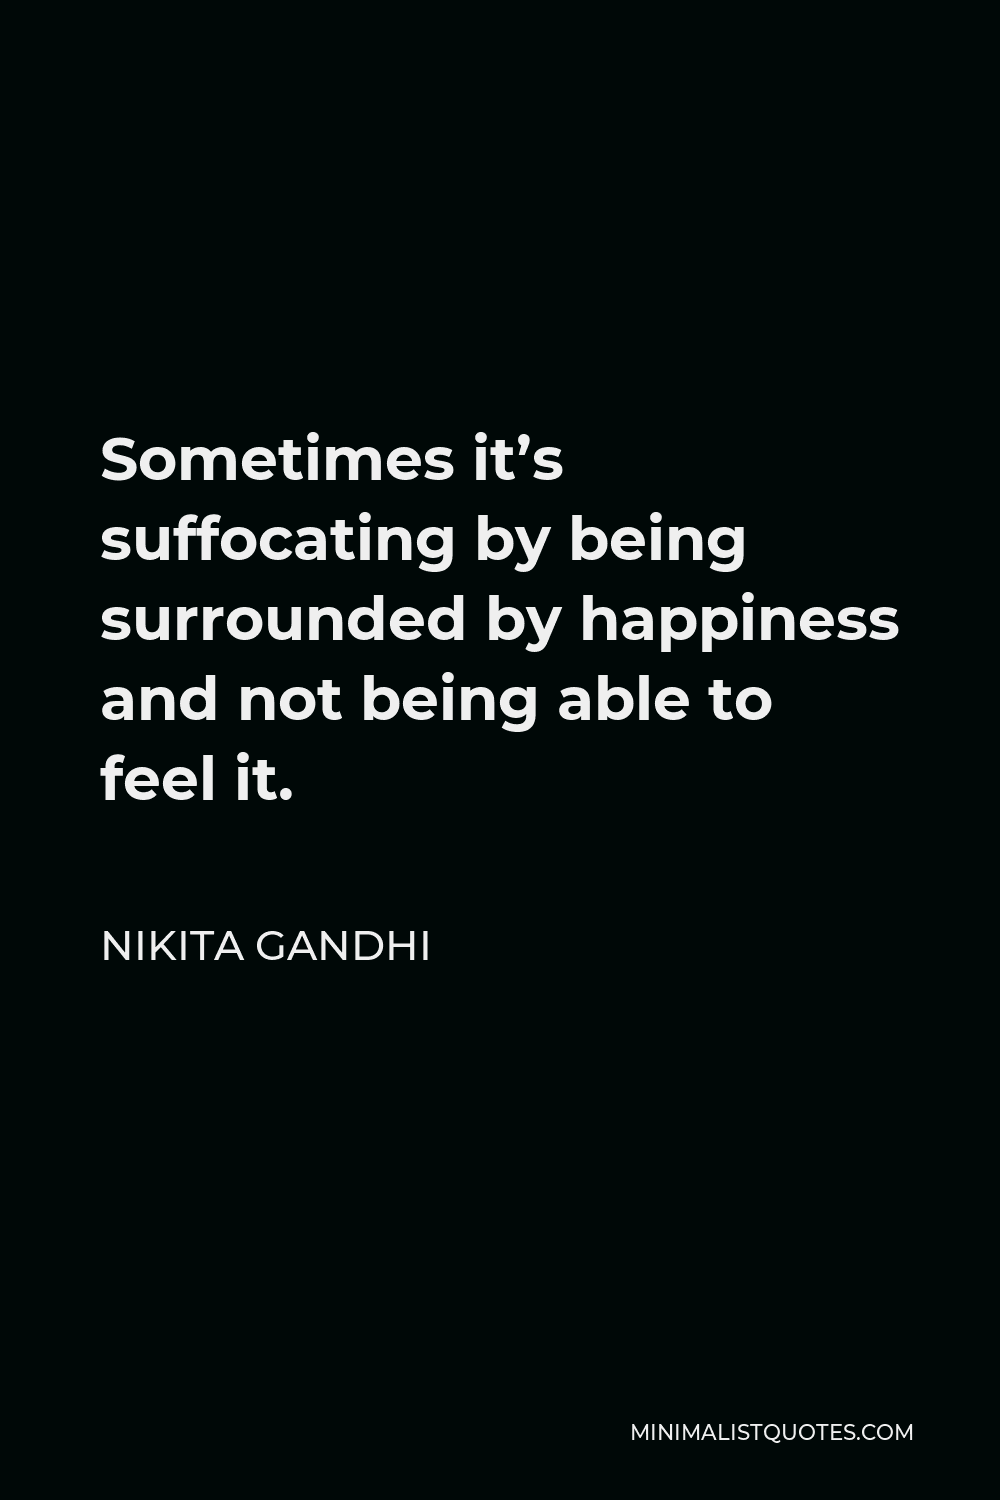 Nikita Gandhi Quote - Sometimes it’s suffocating by being surrounded by happiness and not being able to feel it.